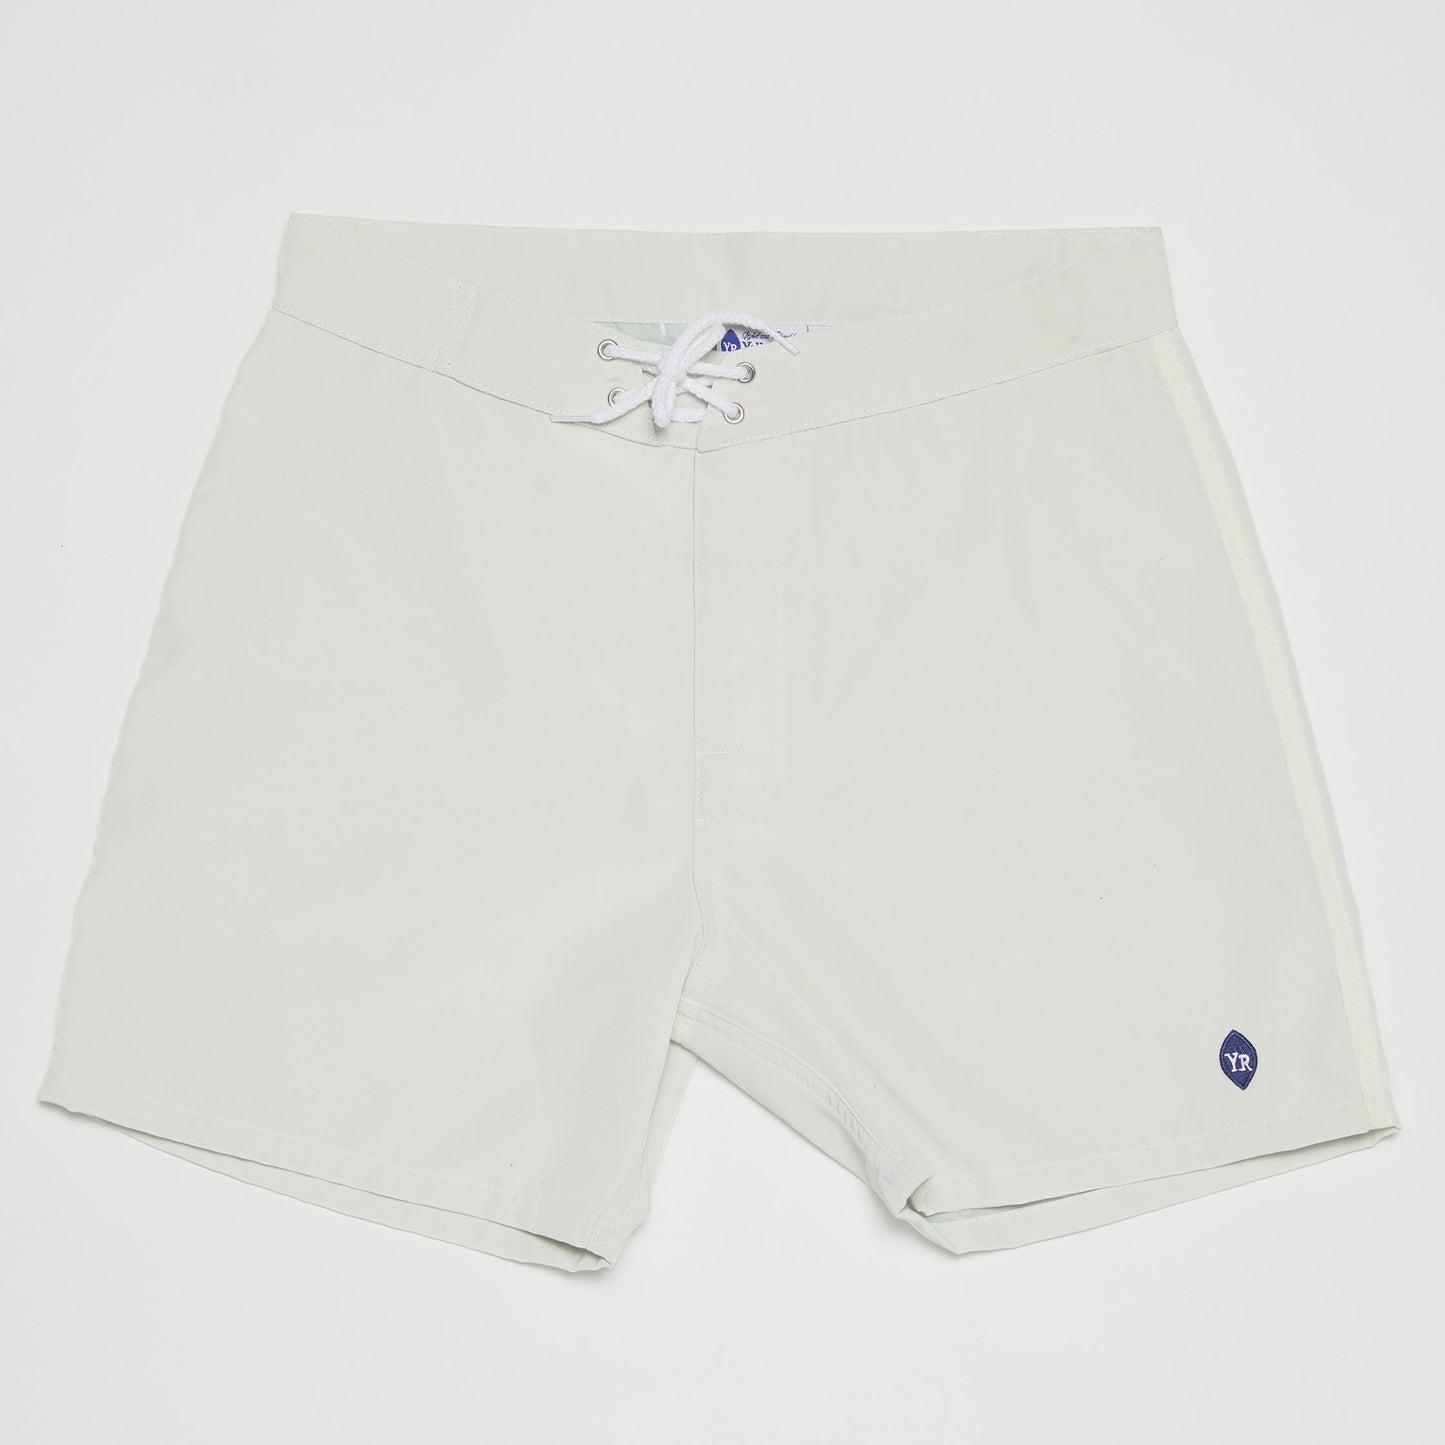 Solid Trunks (White)